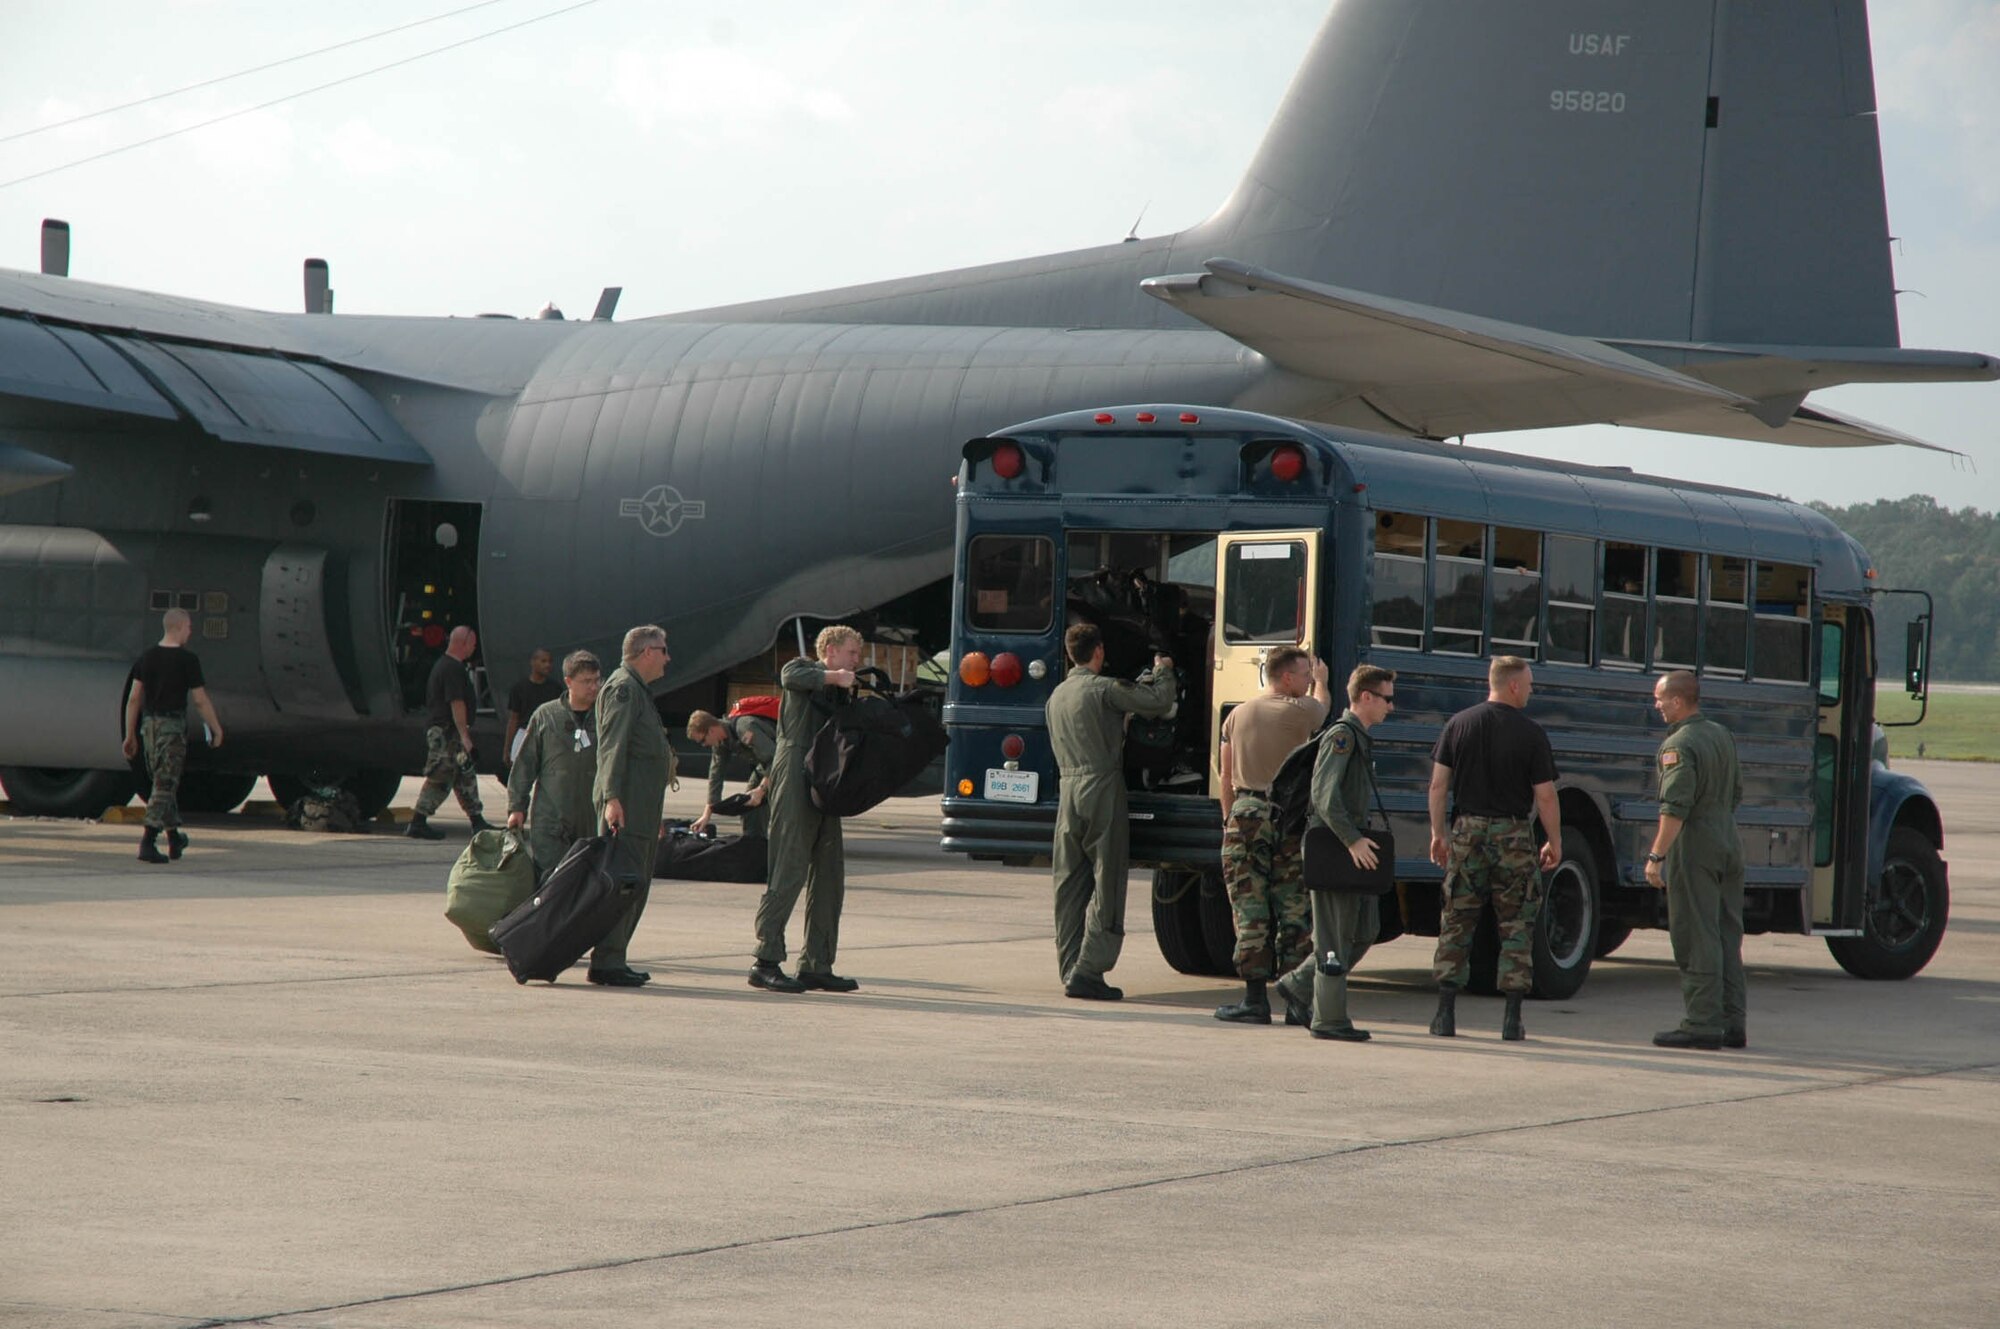 Airmen from the 16th Special Operations Wing from Hurlburt Field, Fla., load onto a bus after landing at Little Rock AFB, Ark.,  Aug. 28. Several Airmen and C-21’s from the 81st Training Wing at Keesler AFB, Miss. and C-130’s from the 16th SOW at Hurlburt Field sought refuge at Little Rock as Hurricane Katrina inched its way toward the coast. (Photo by 1st Lt. Jon Quinlan)